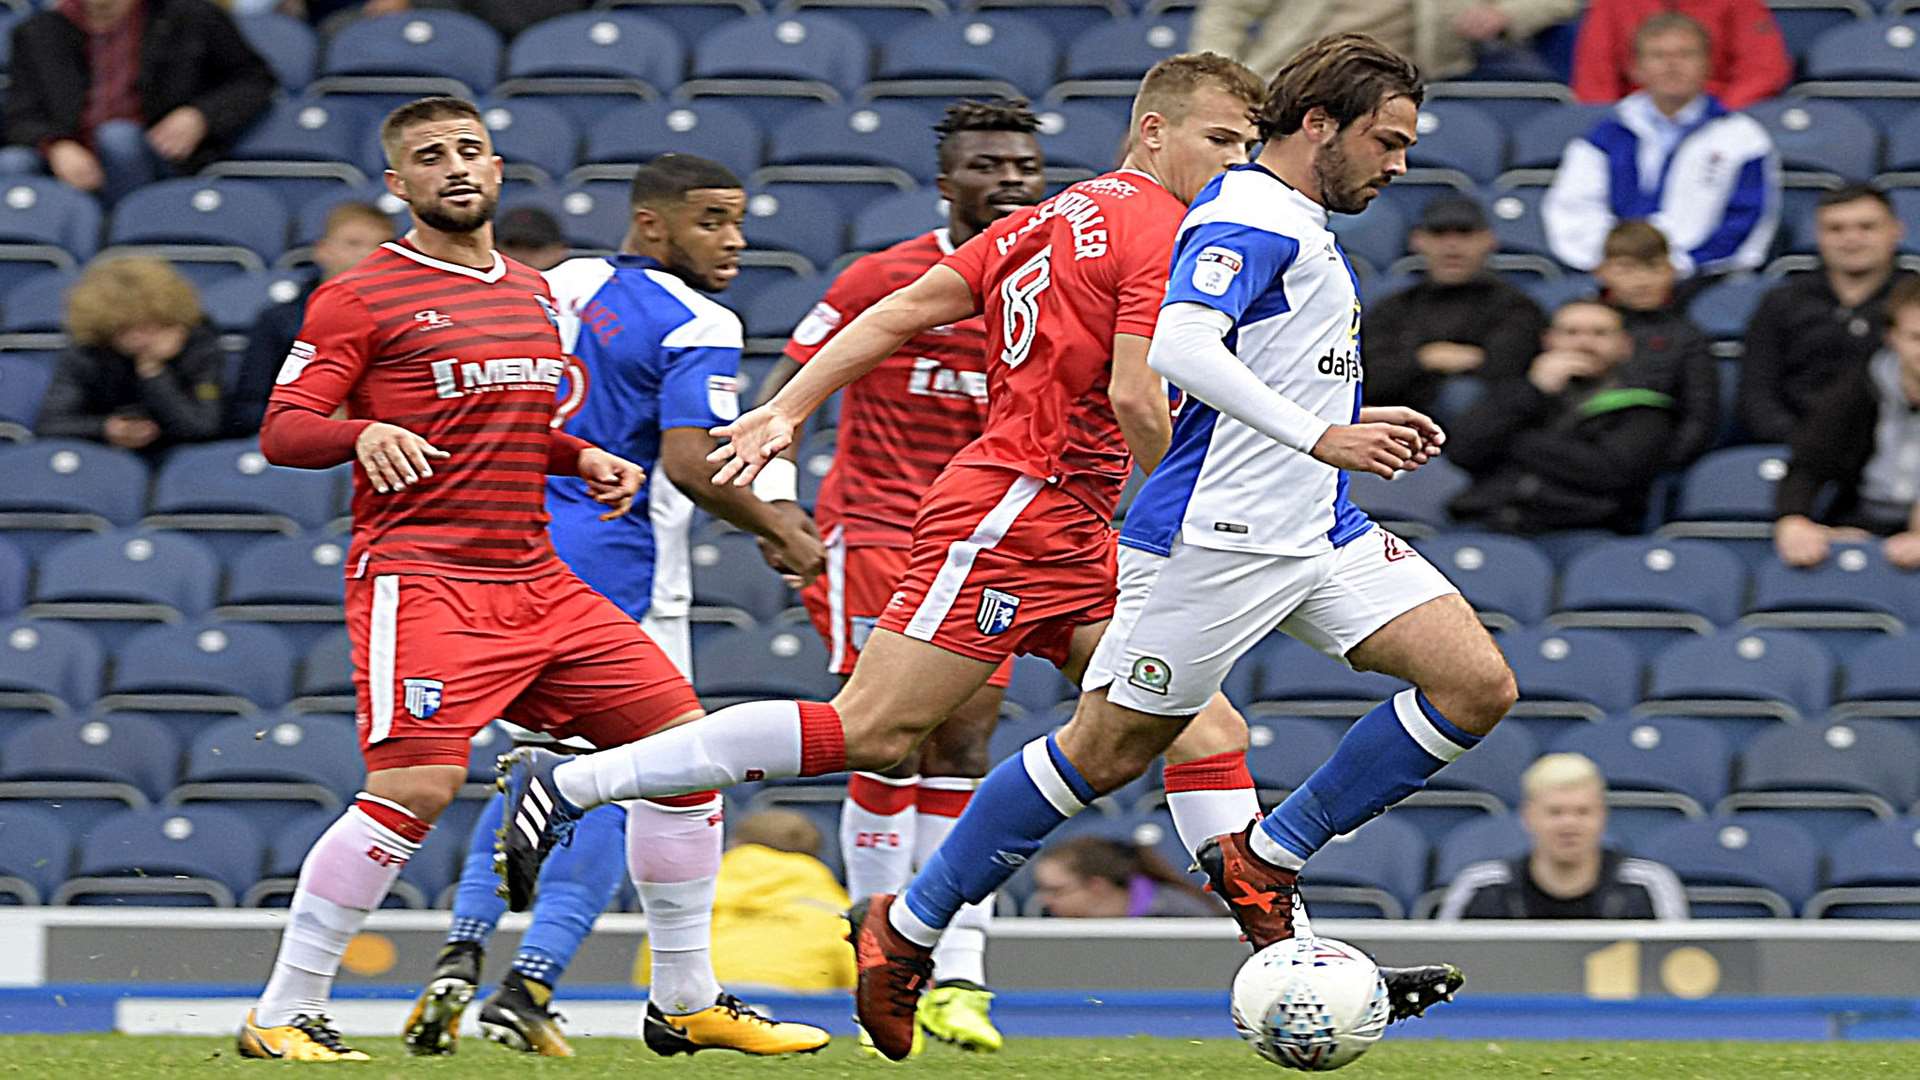 Jake Hessenthaler chases down former team-mate Bradley Dack at Ewood Park in September Picture: Barry Goodwin